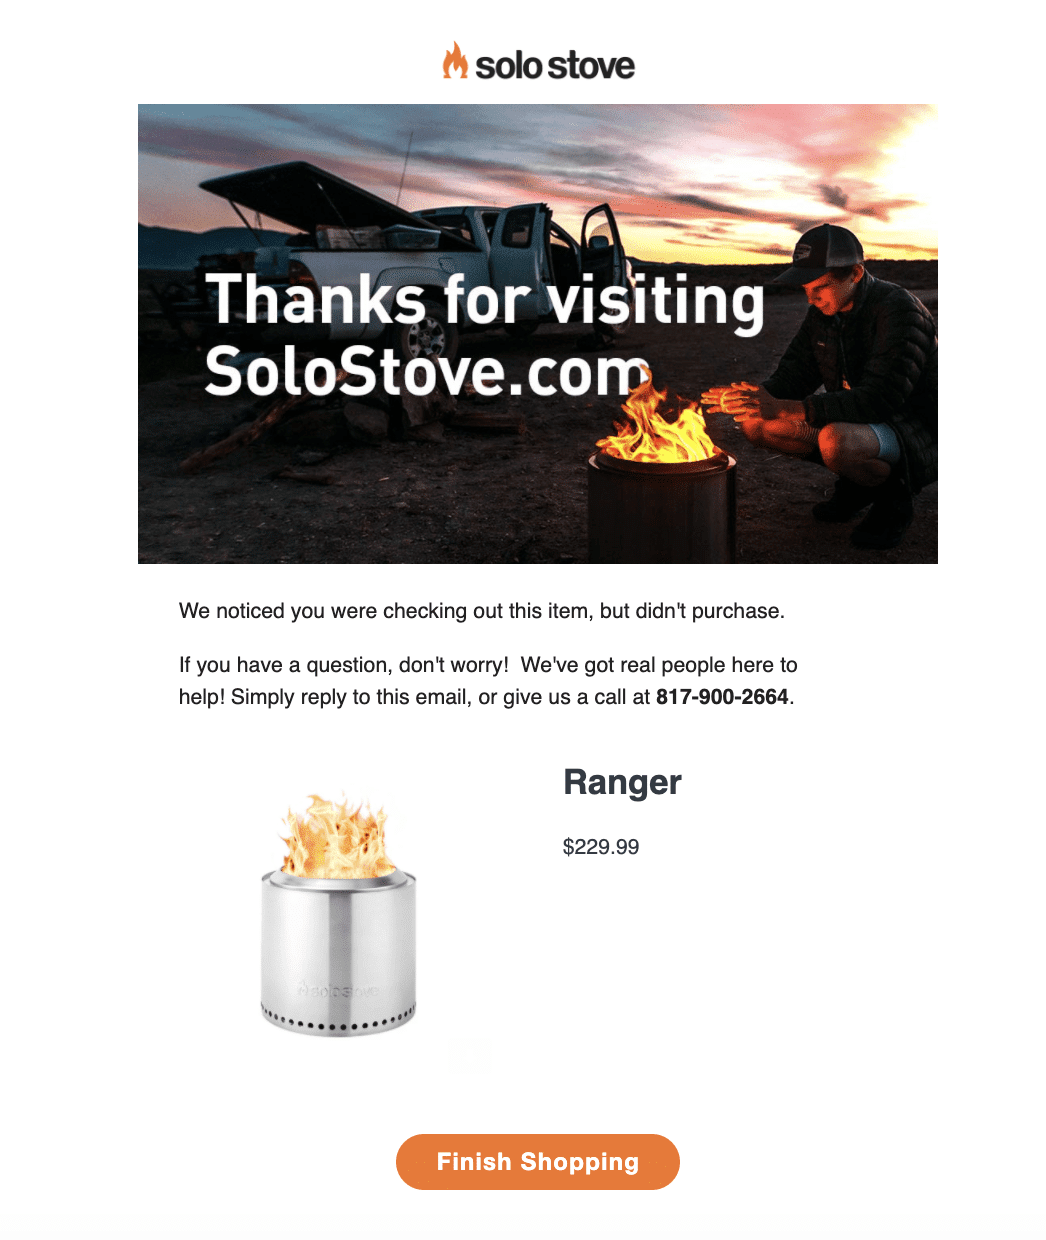 Solo stove checkout reminder email